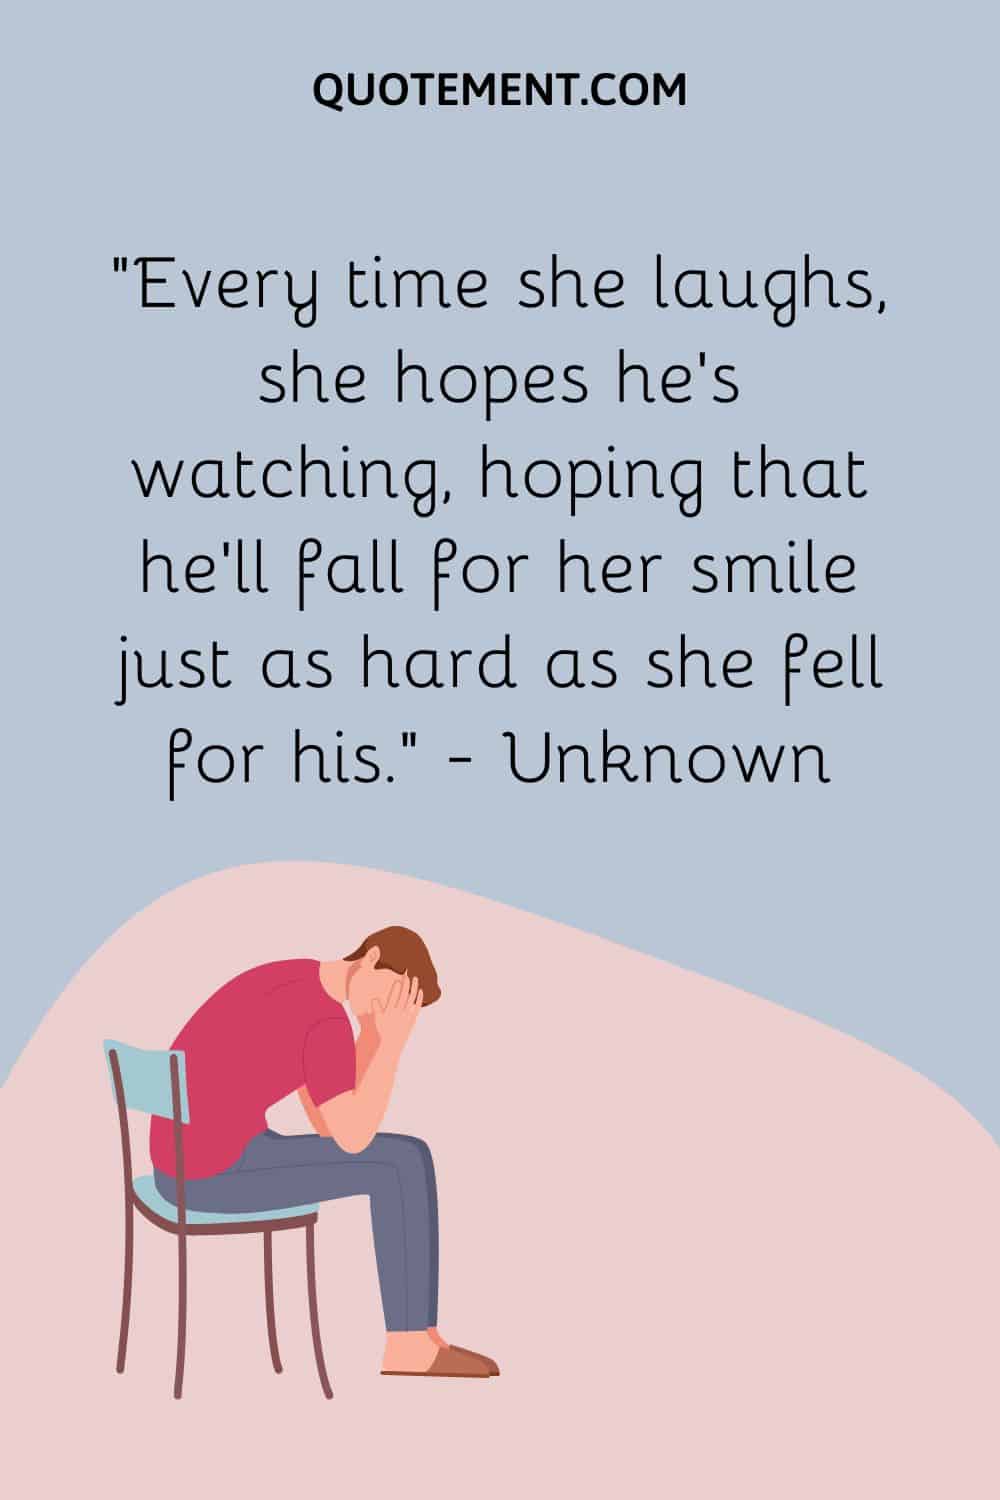 Every time she laughs, she hopes he’s watching, hoping that he’ll fall for her smile just as hard as she fell for his